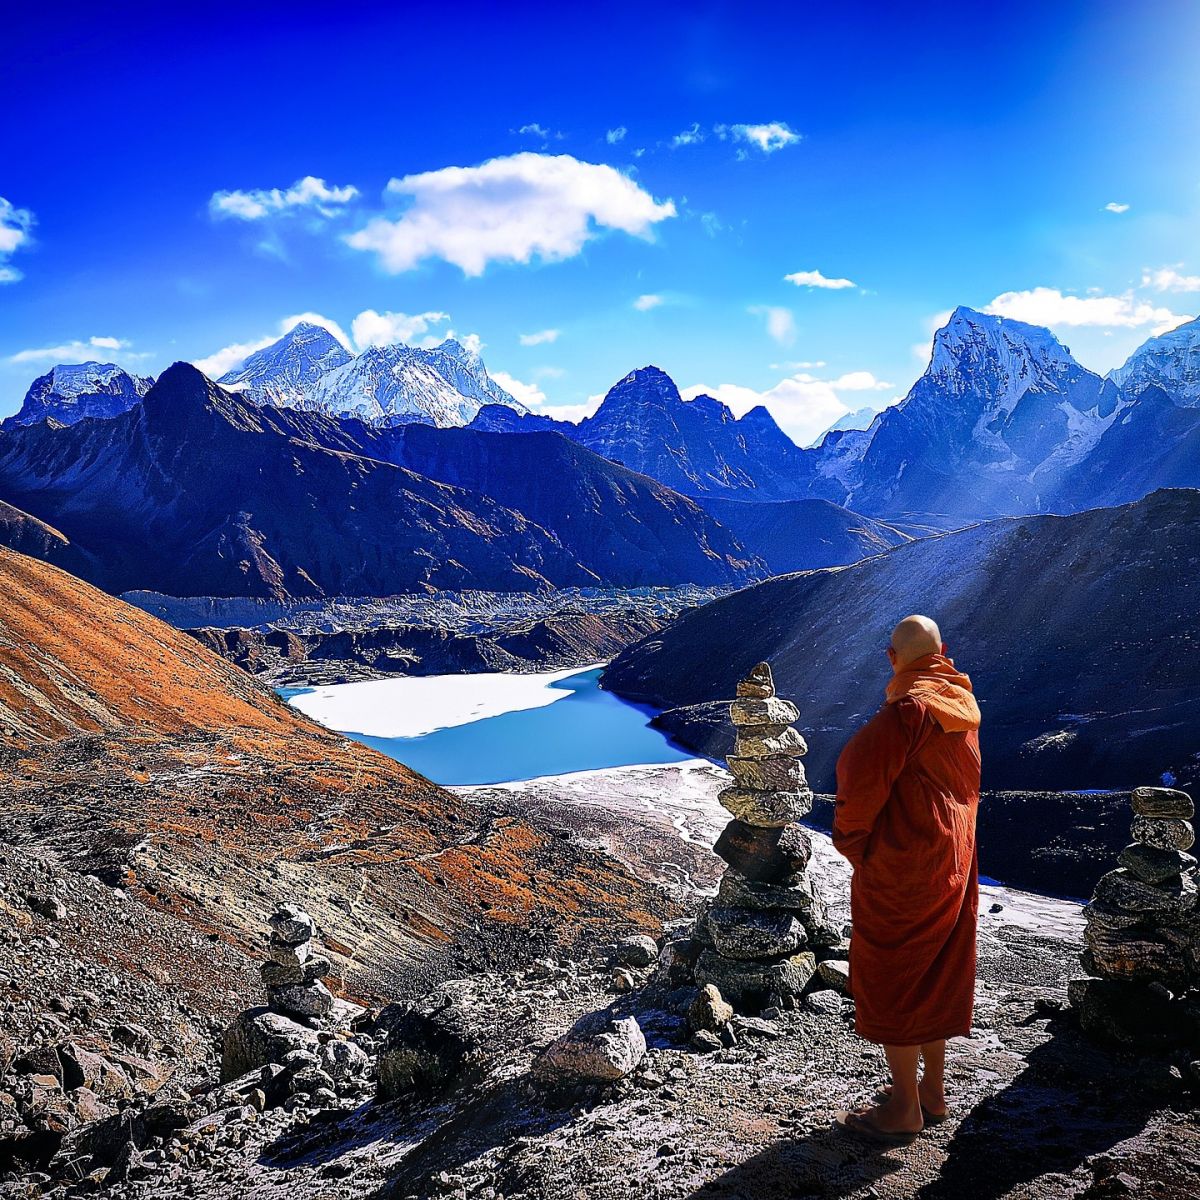 Buddhist monk in traditional red robe standing in Himalayas along Everest Base Camp trek route